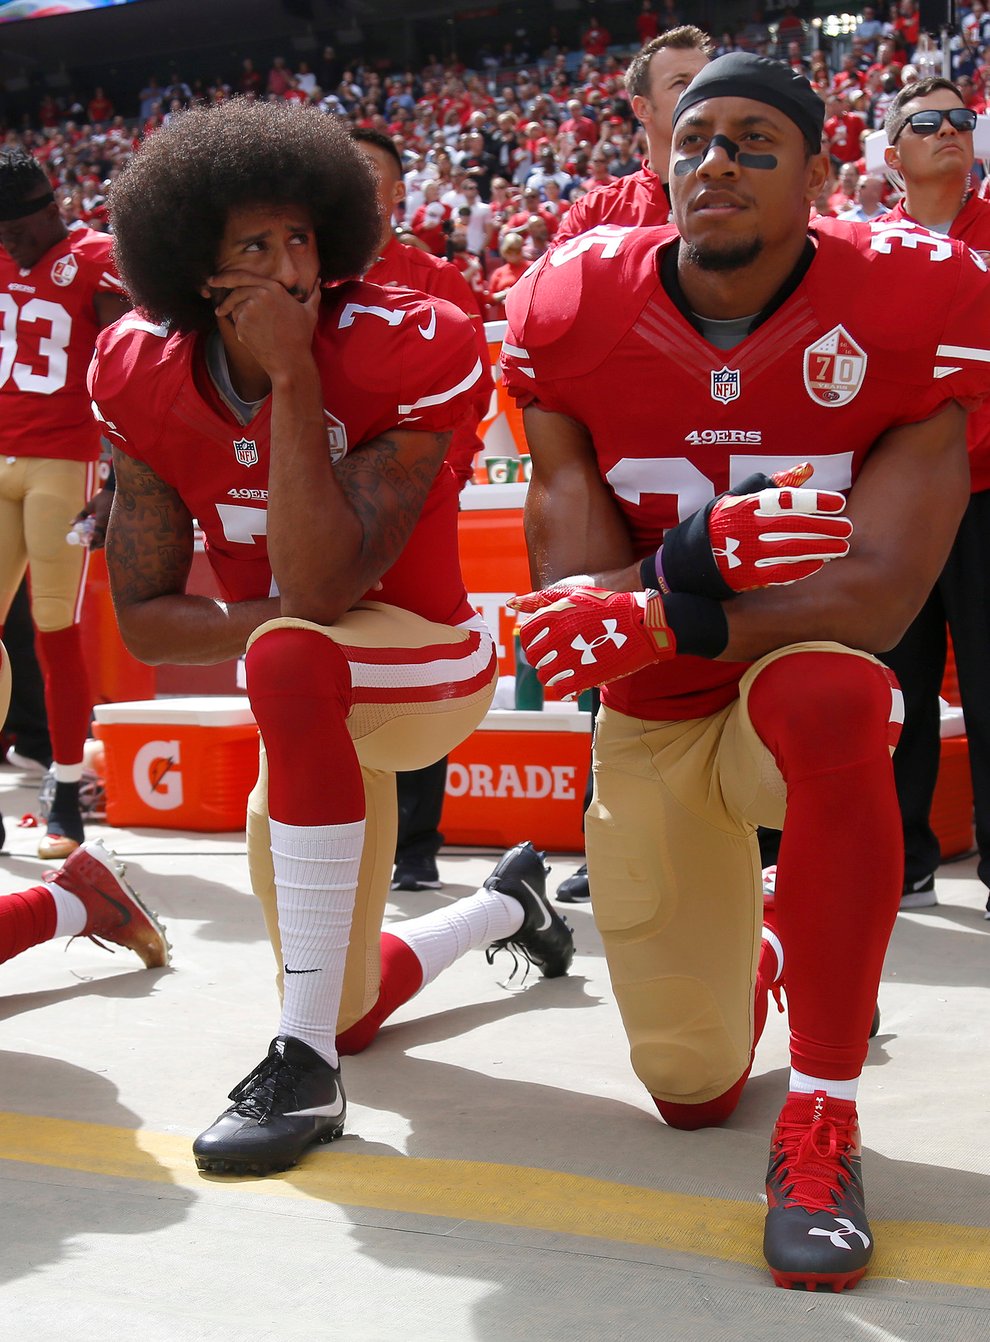 Kaepernick (centre) famously knelt during the national anthem in 2016